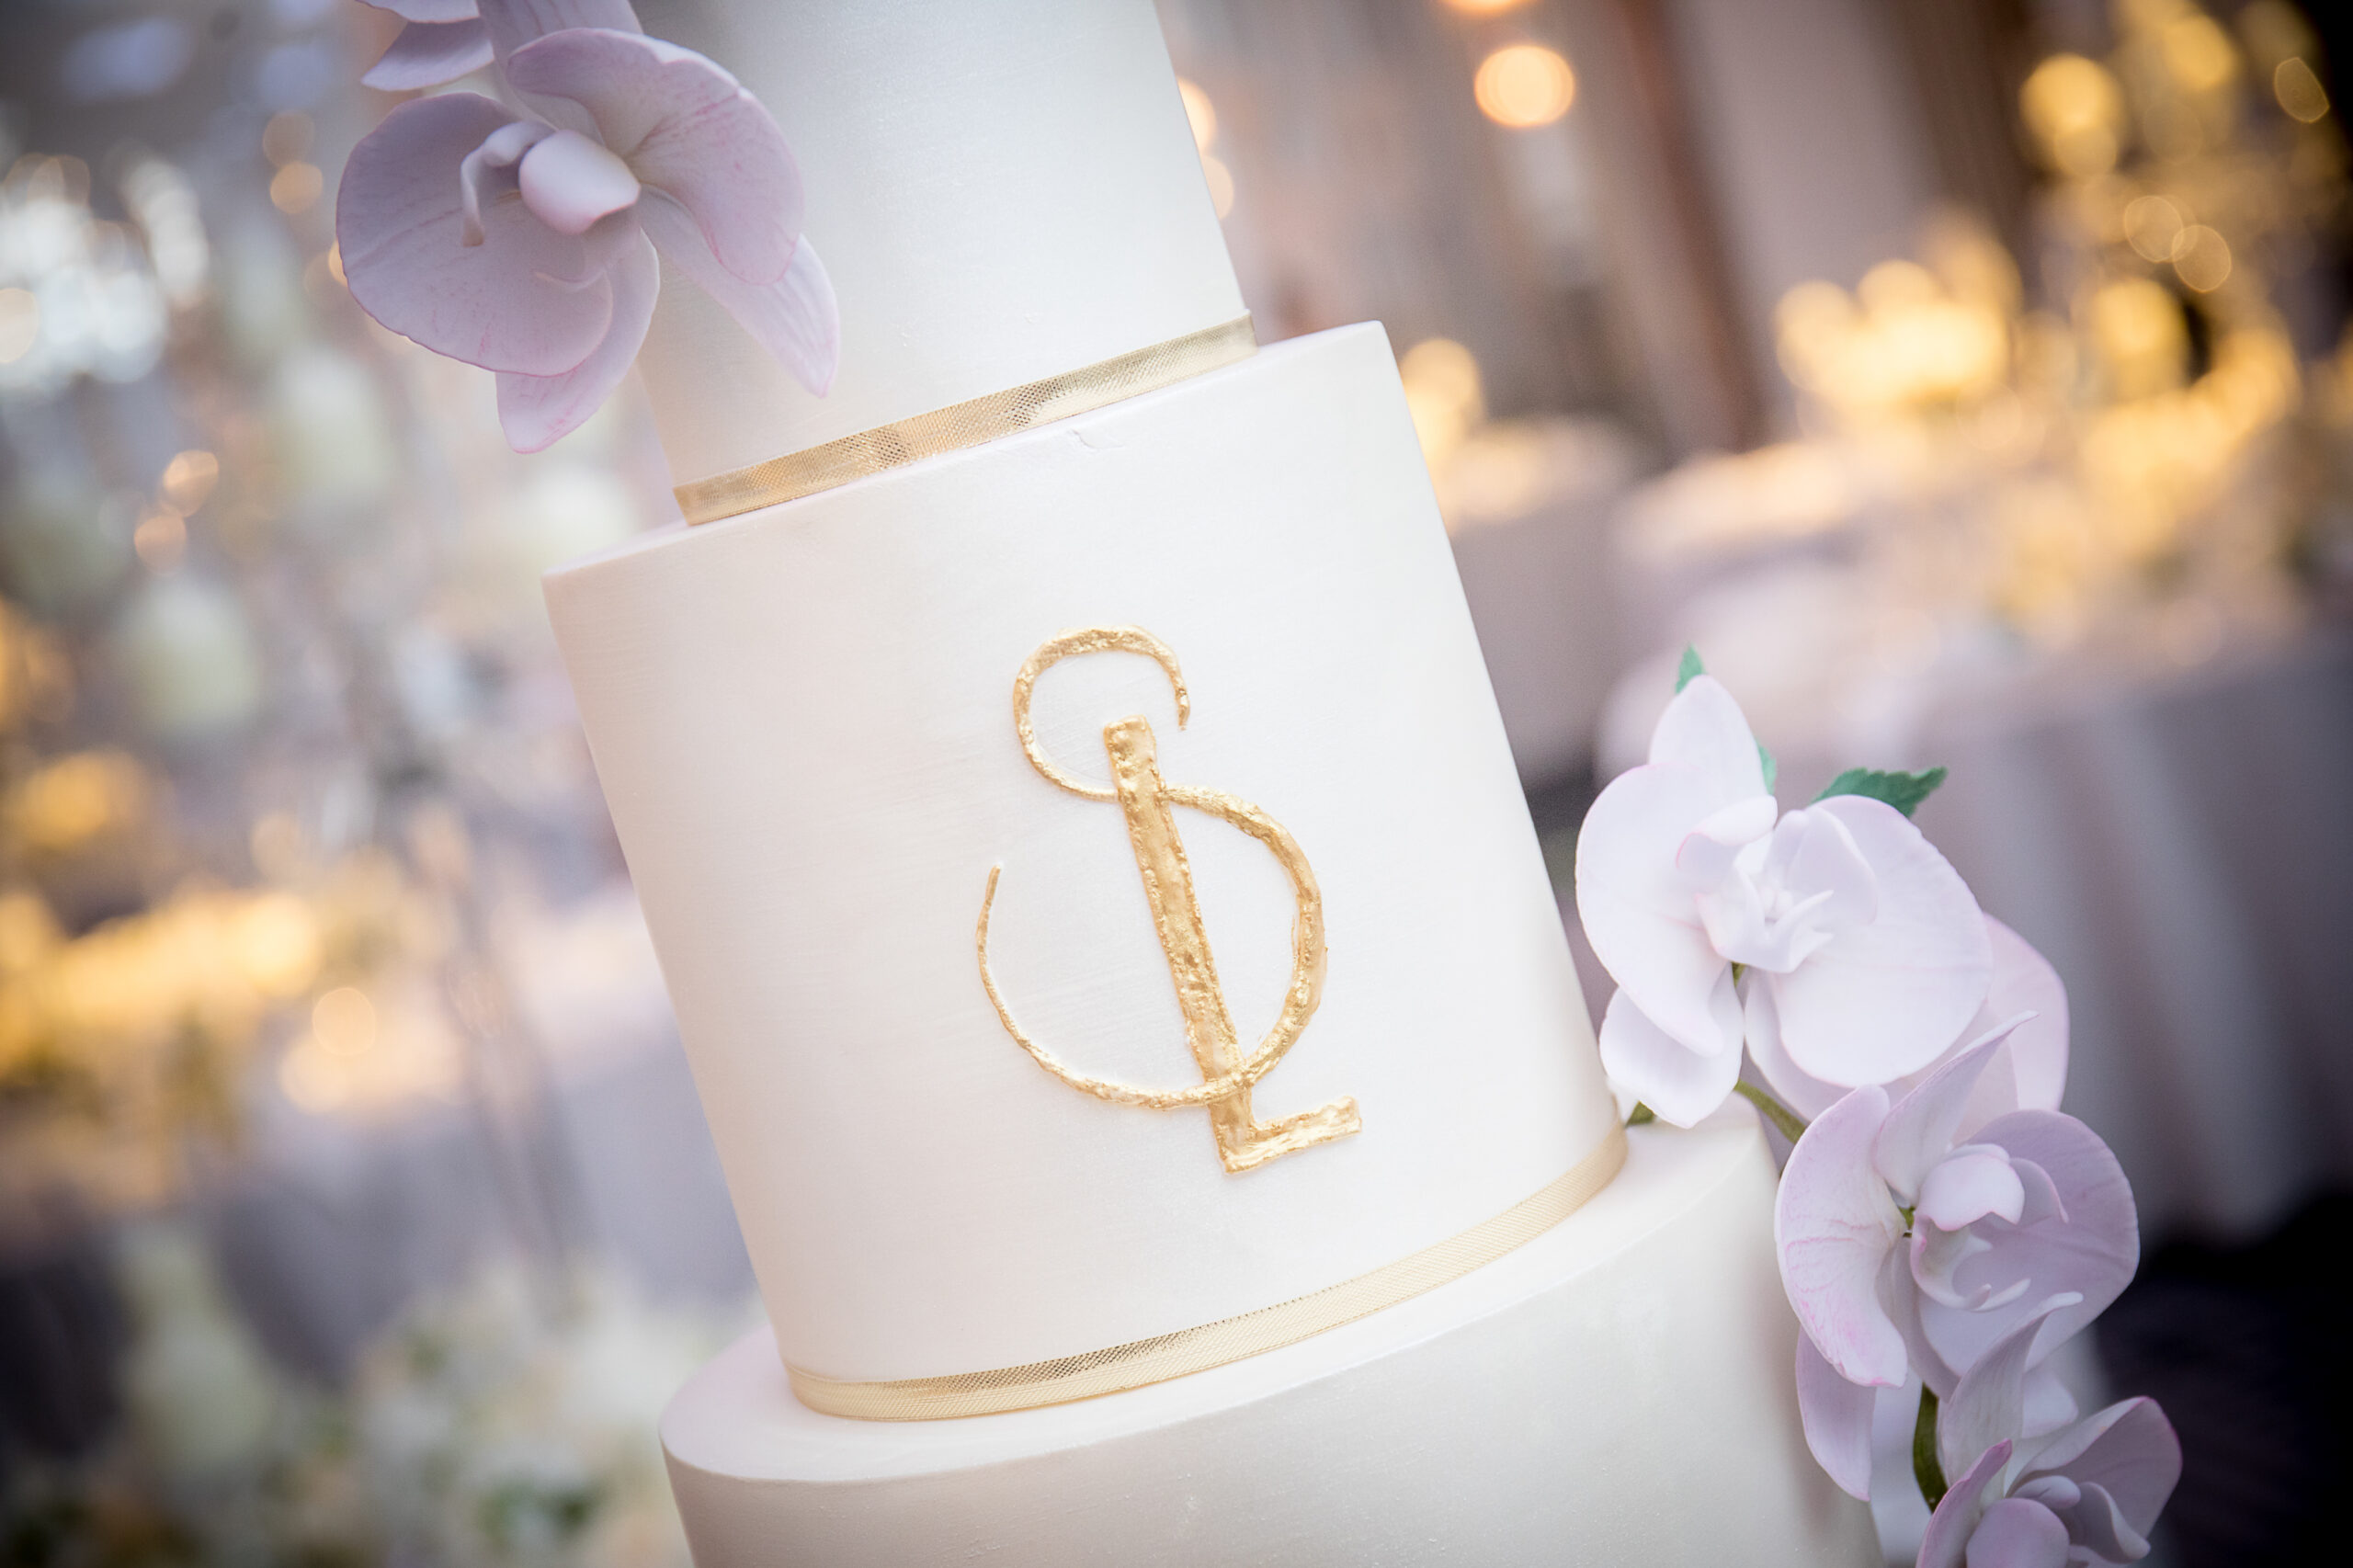 Art Deco Chic luxury wedding cake By Yevnig for Orchid Events at Claridge's Hotel, by Promise Photography